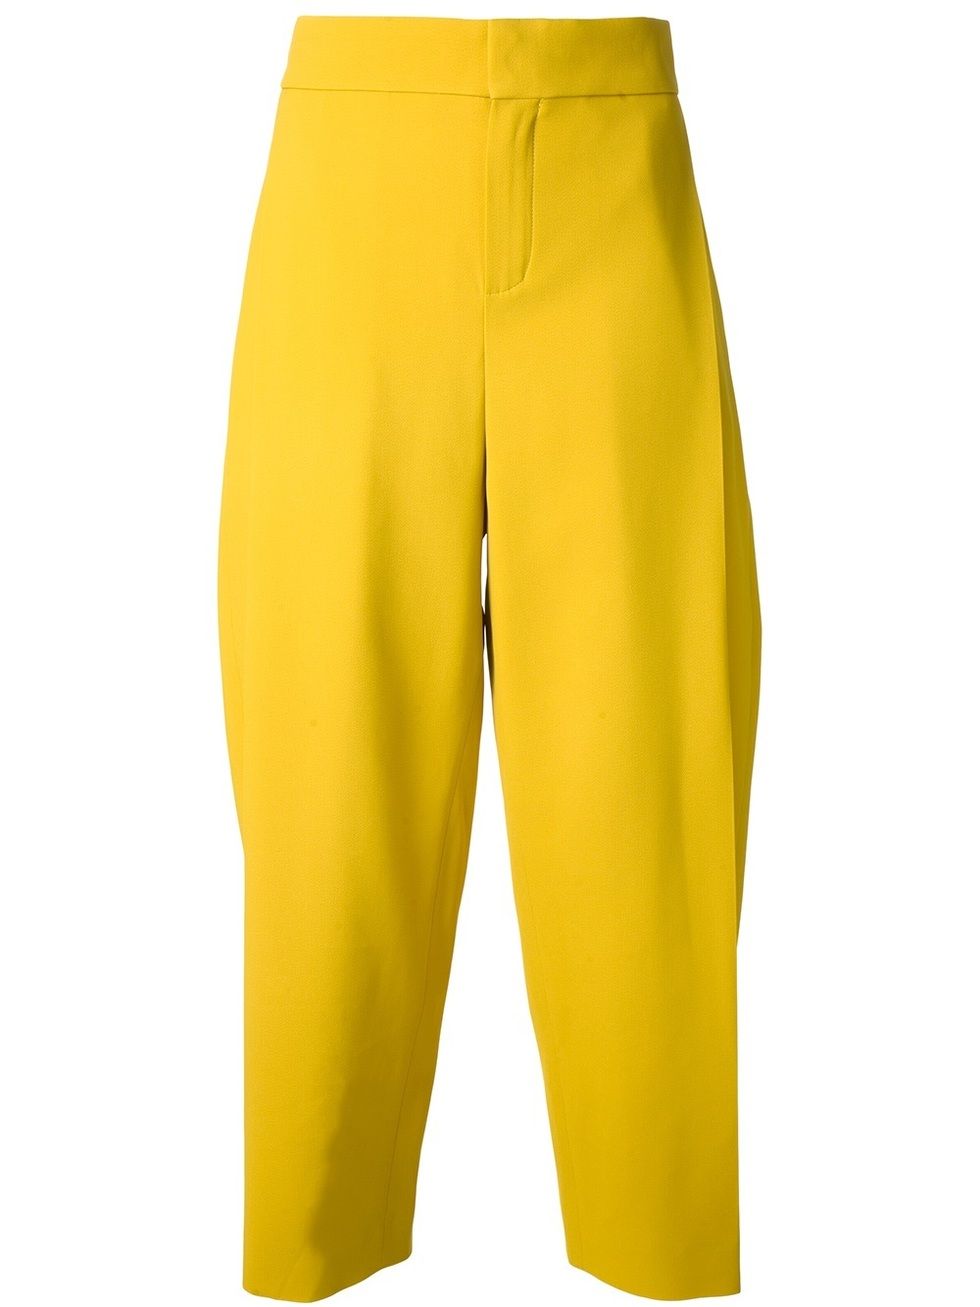 Clothing, Yellow, Textile, Active pants, Costume, Suit trousers, Tights, Waist, Silk, Fashion design, 